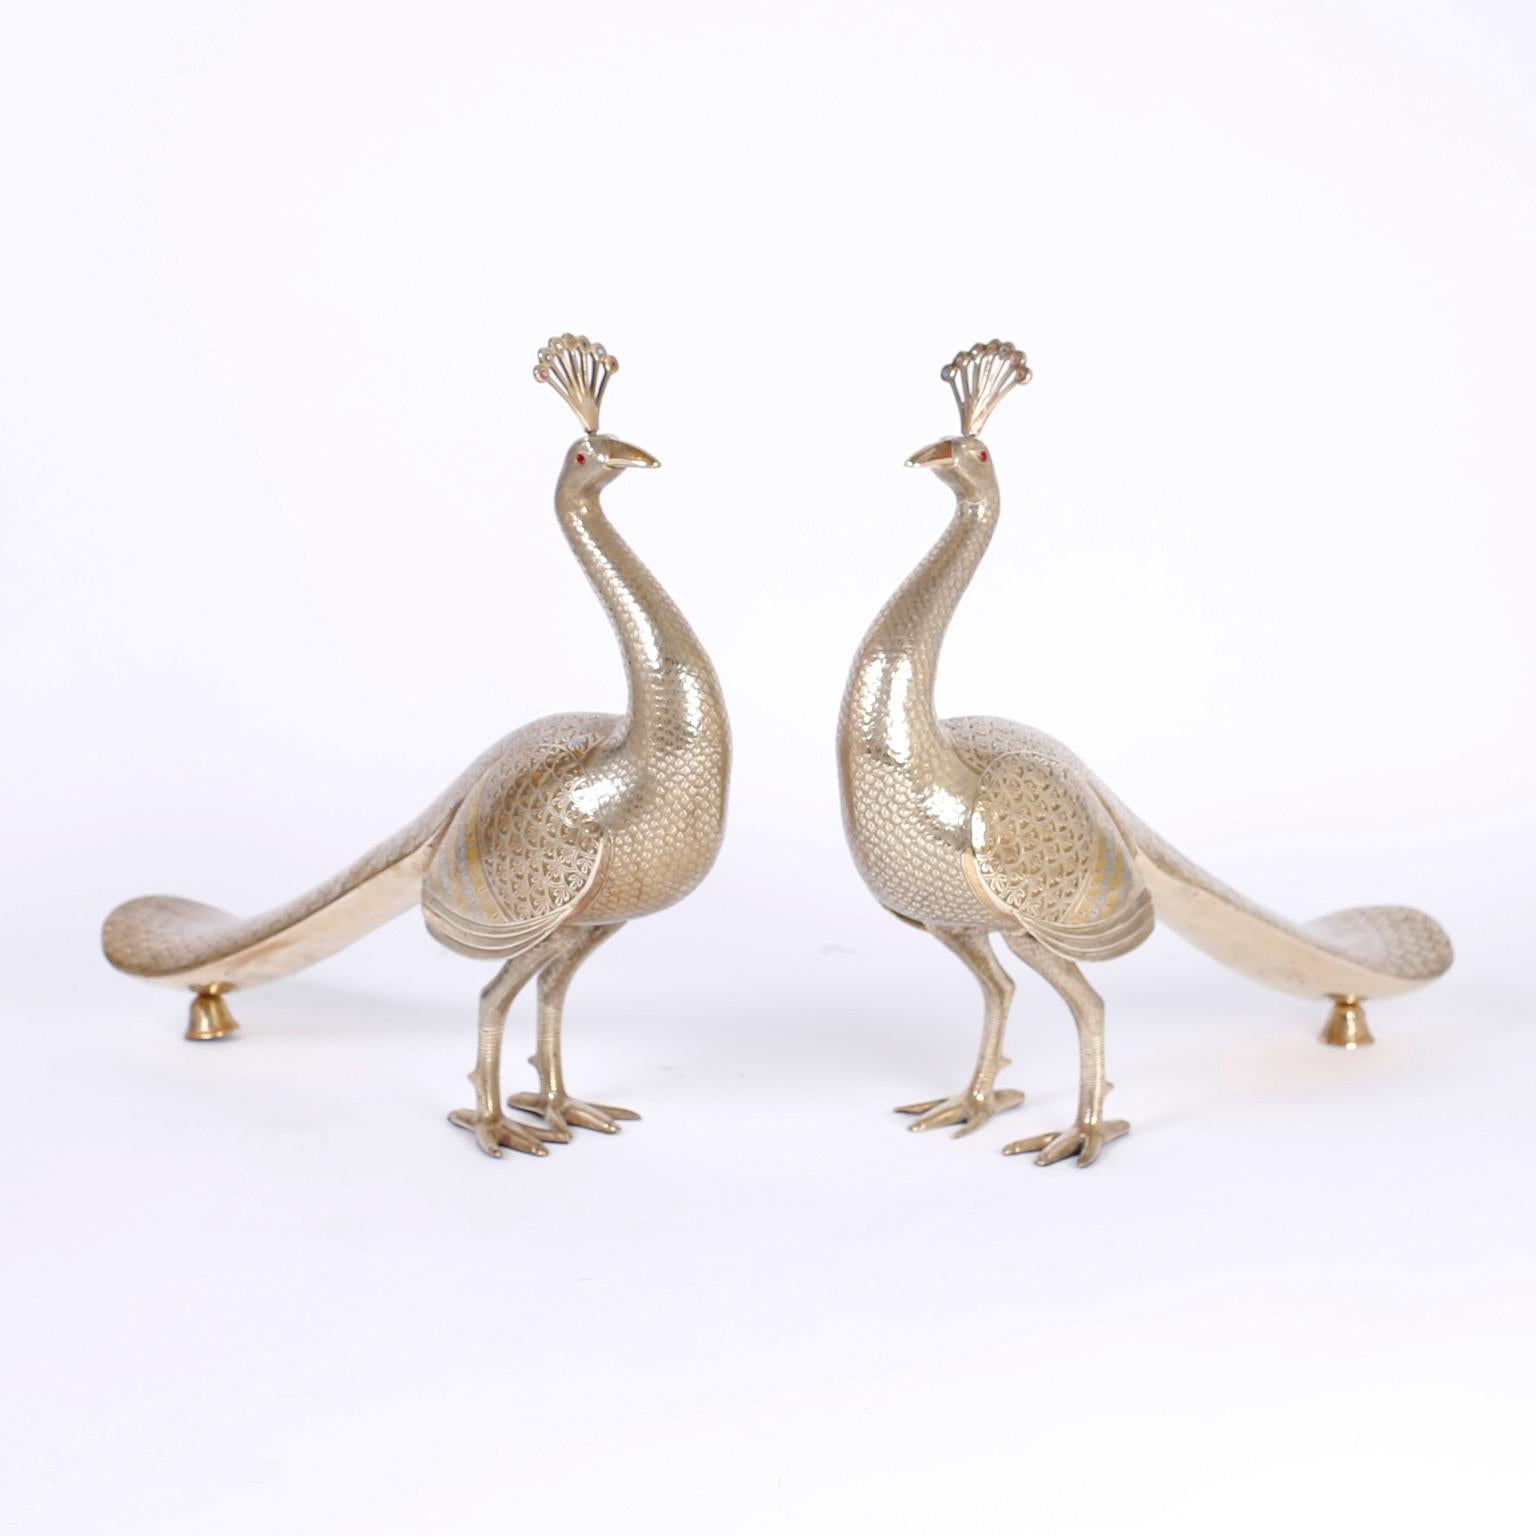 Impressive pair of midcentury Anglo-Indian cast brass peacocks decorated with enamel stylized feathers adorned with cut glass jewels.